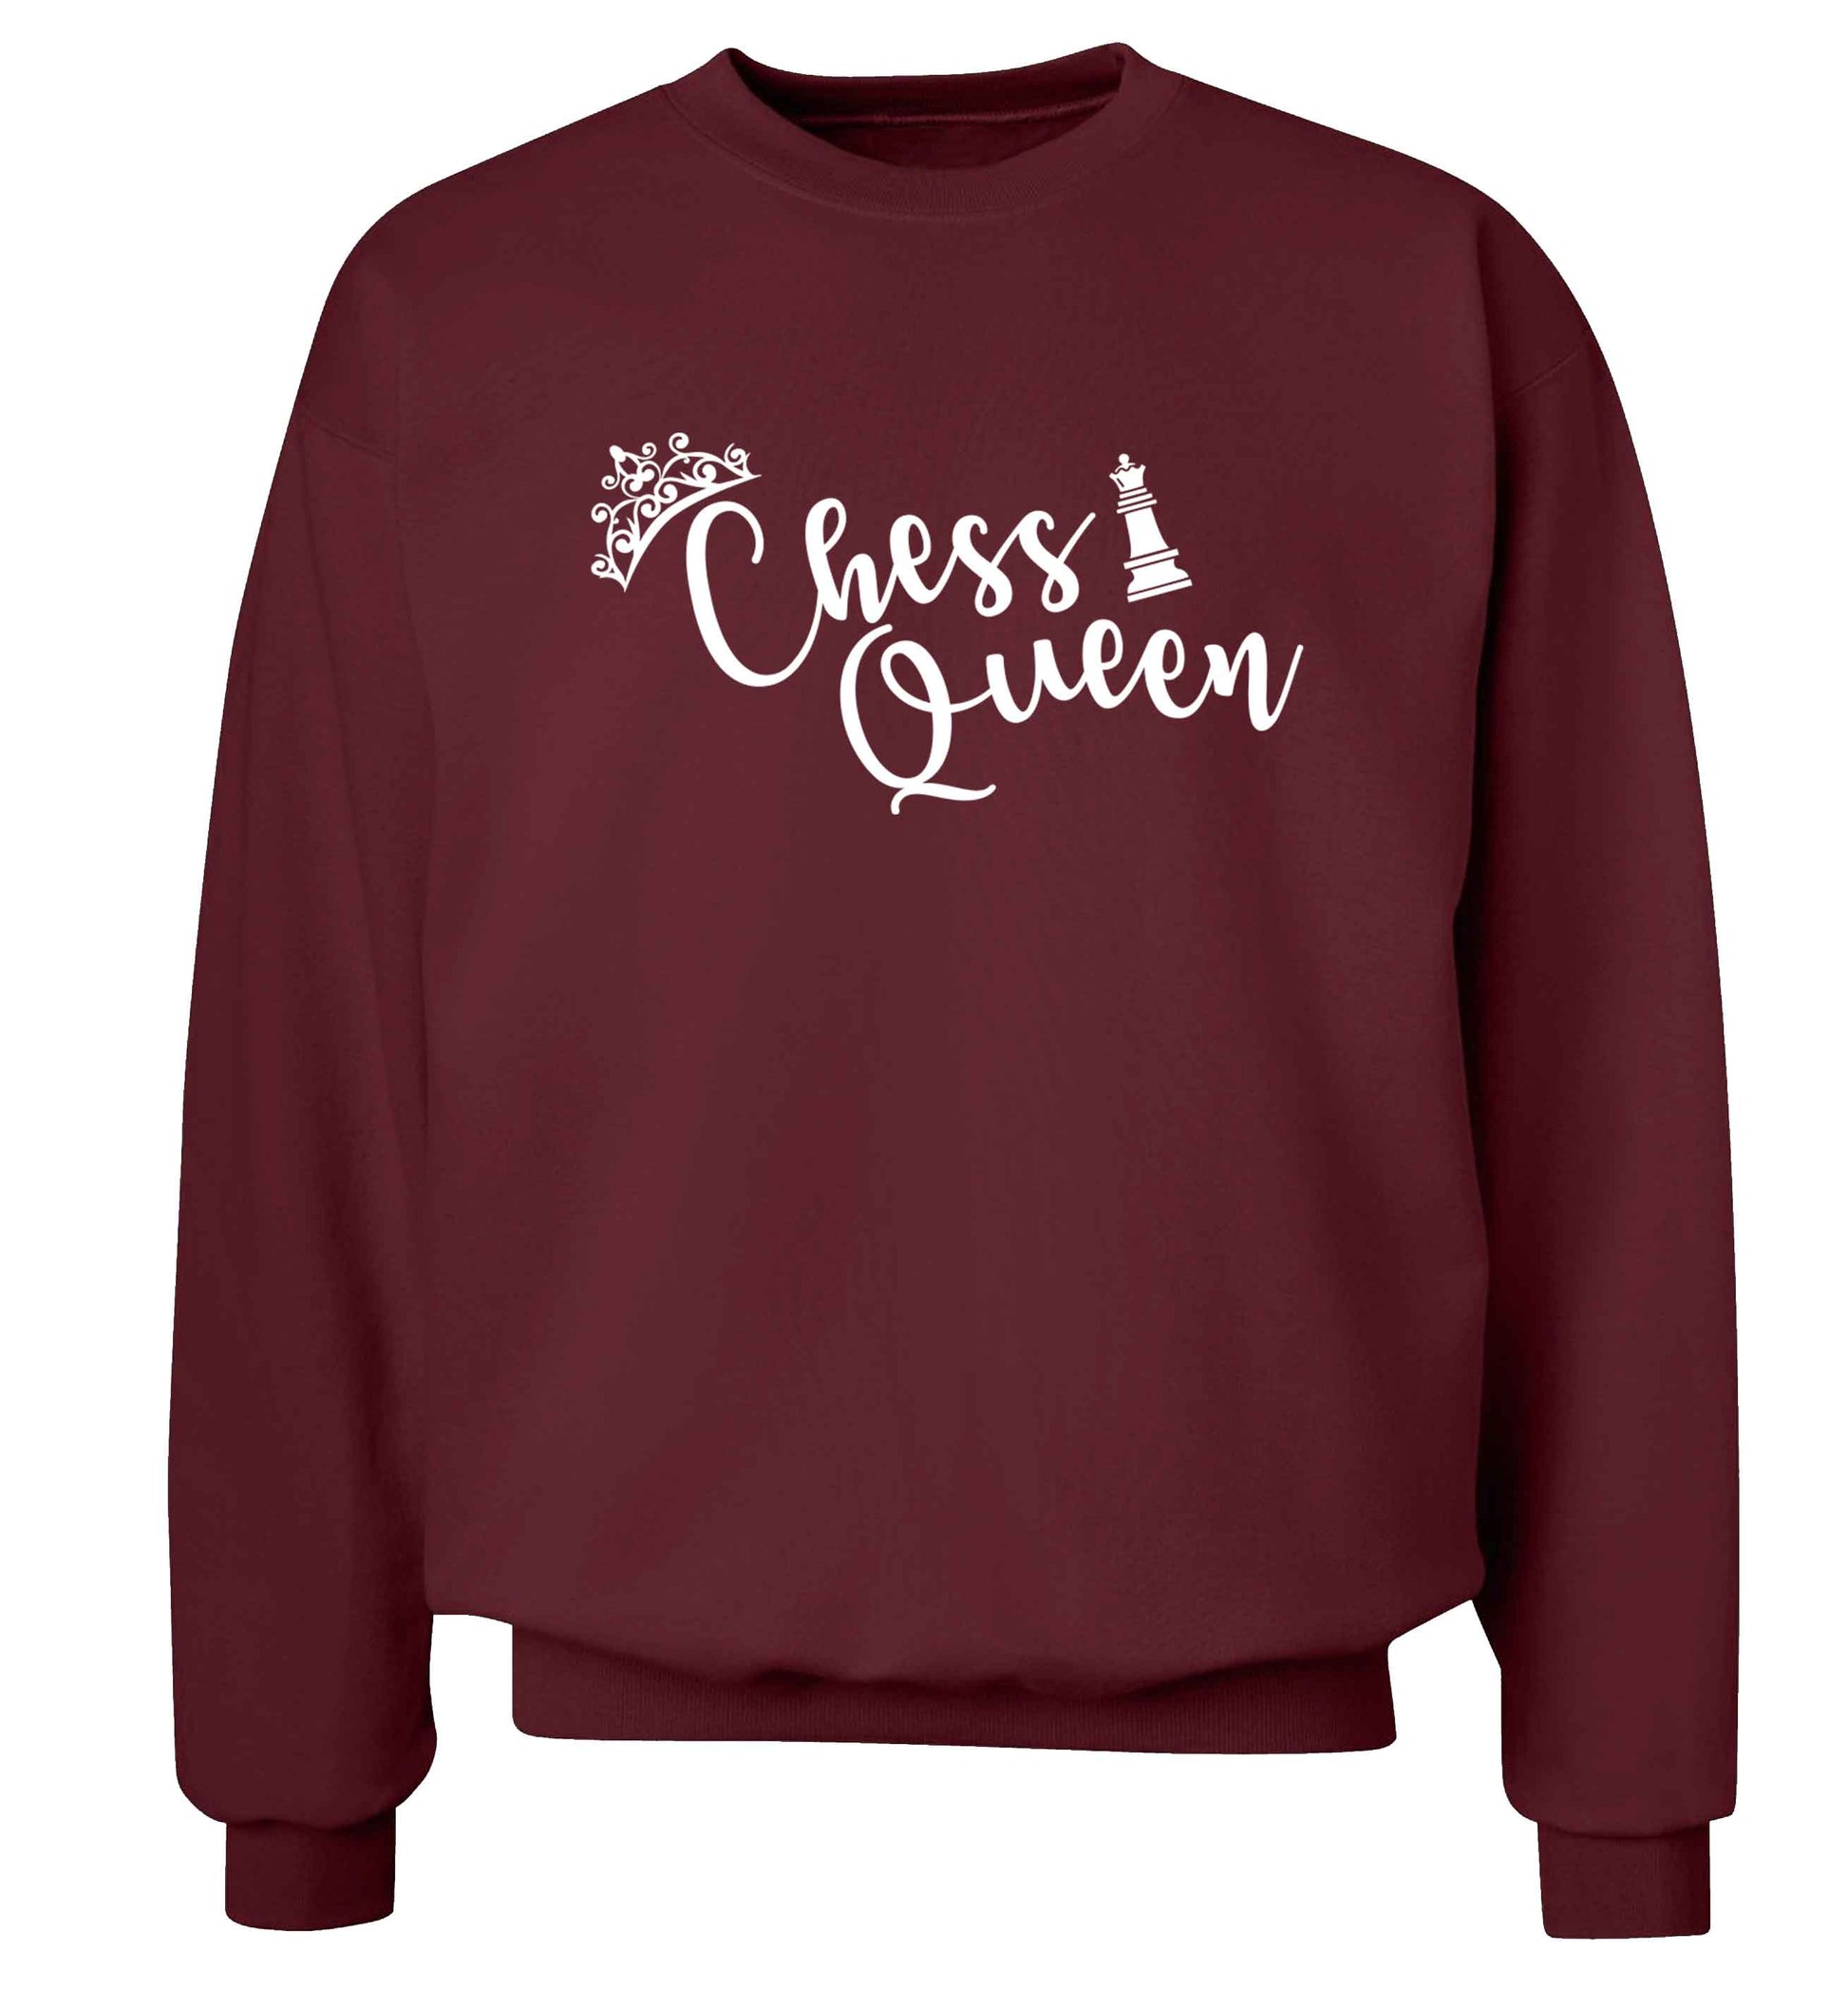 Pink chess queen  Adult's unisex maroon Sweater 2XL